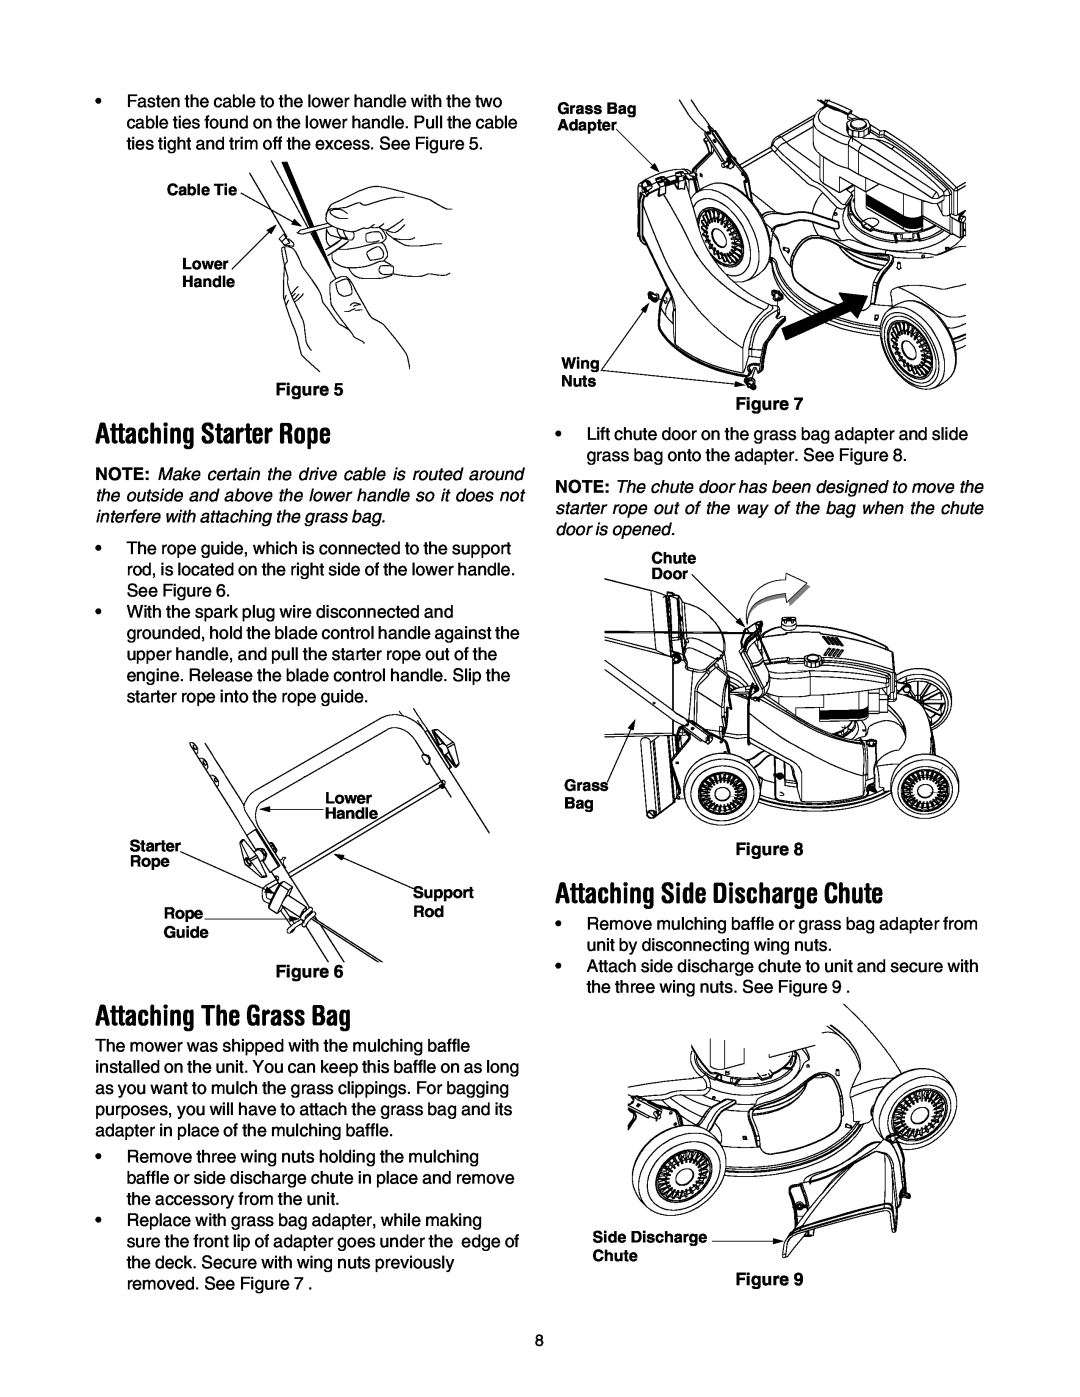 Cub Cadet 977A Attaching Starter Rope, Attaching The Grass Bag, Attaching Side Discharge Chute, Cable Tie Lower Handle 